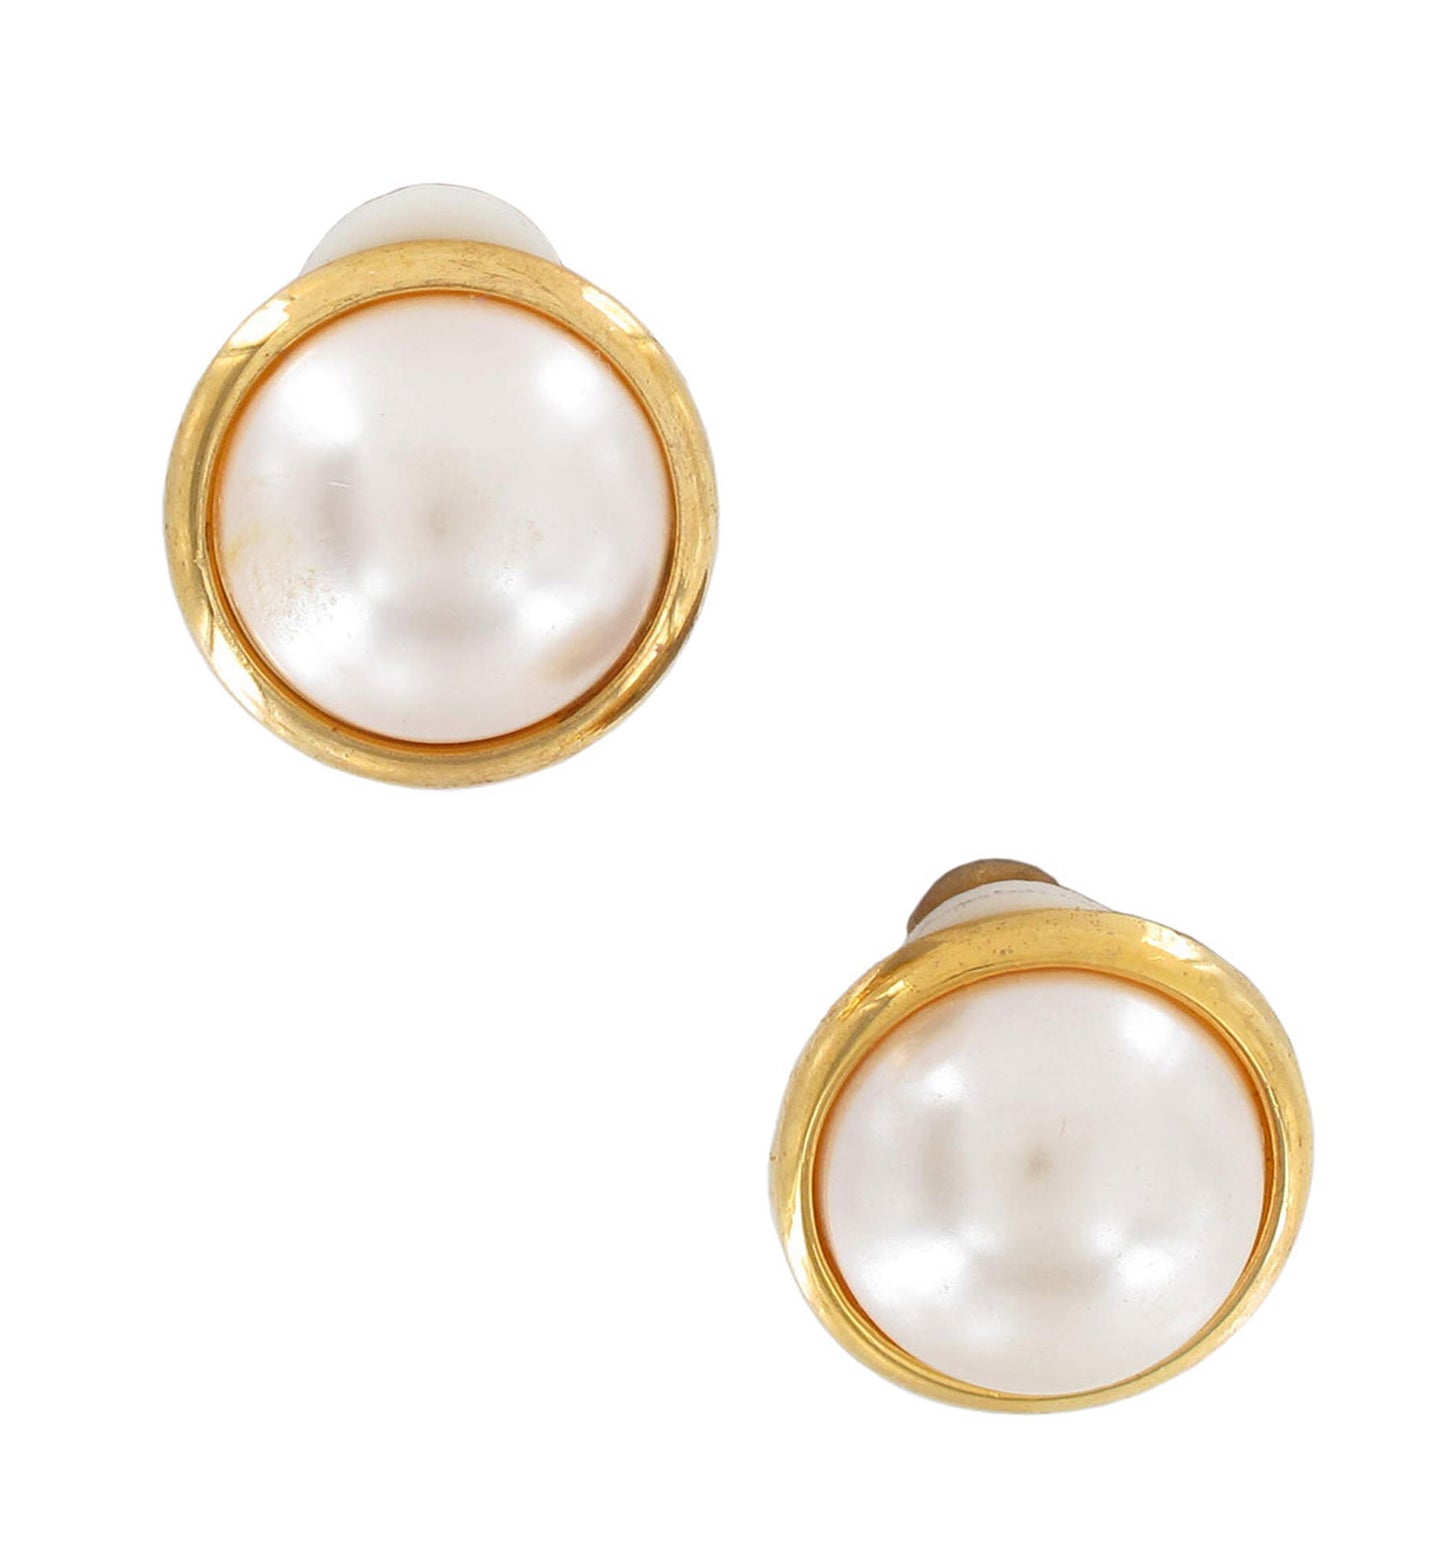 Clip On Earrings White Faux Pearl Button Gold Tone 17mm 11/16"